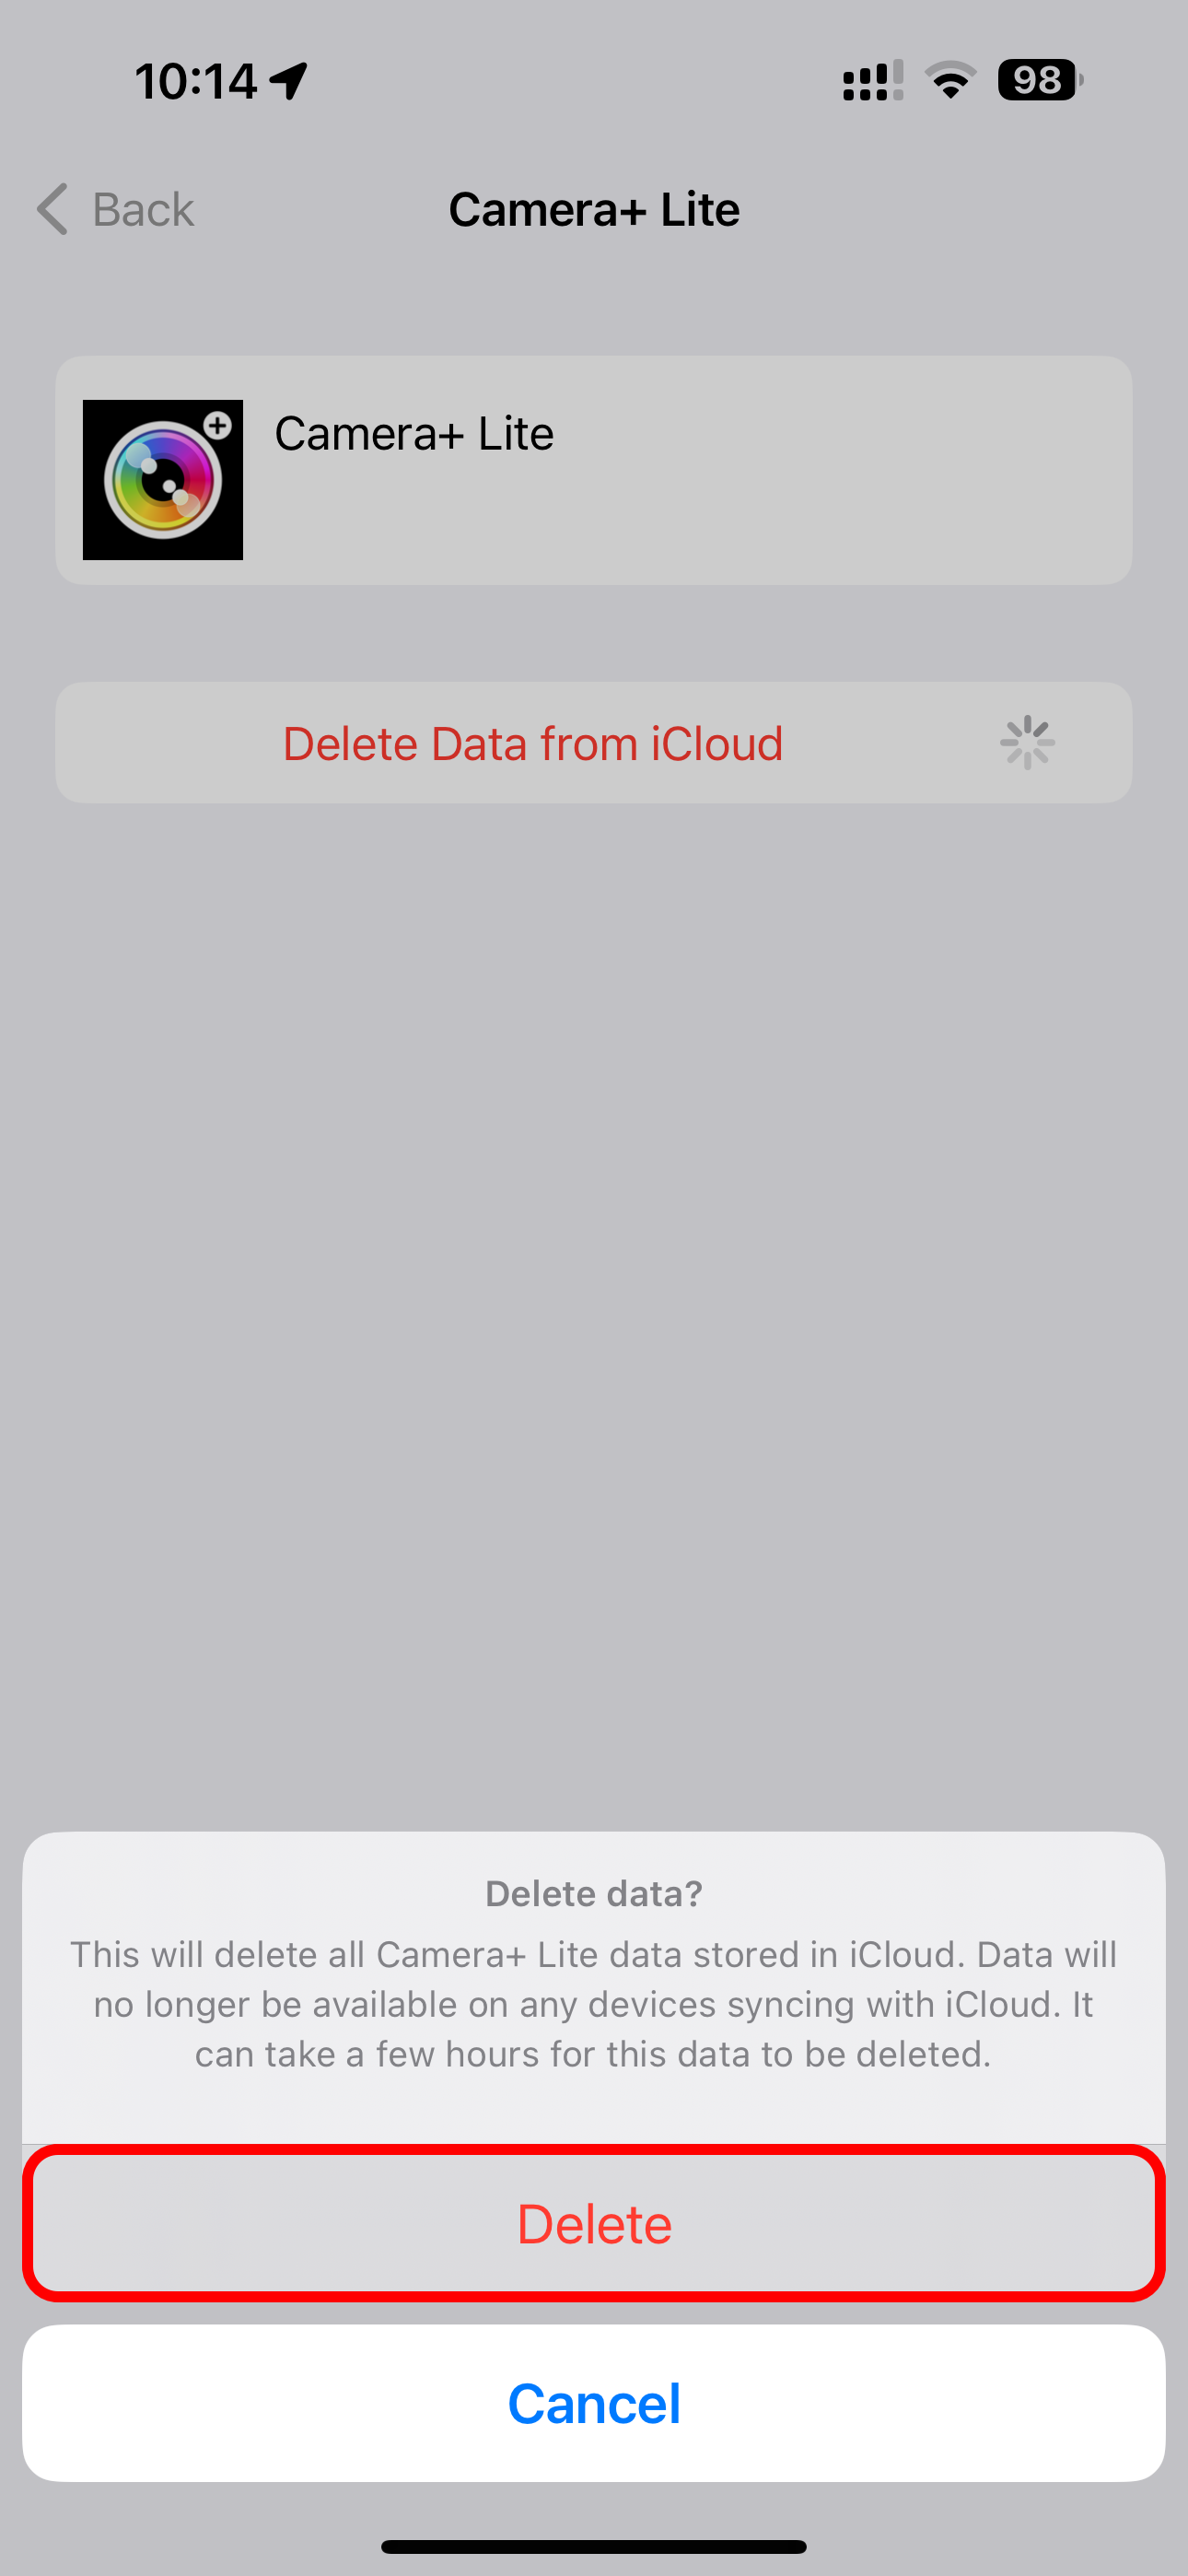 Confirming deleting data from iCloud for the Camera+ Lite app in Settings on iPhone.